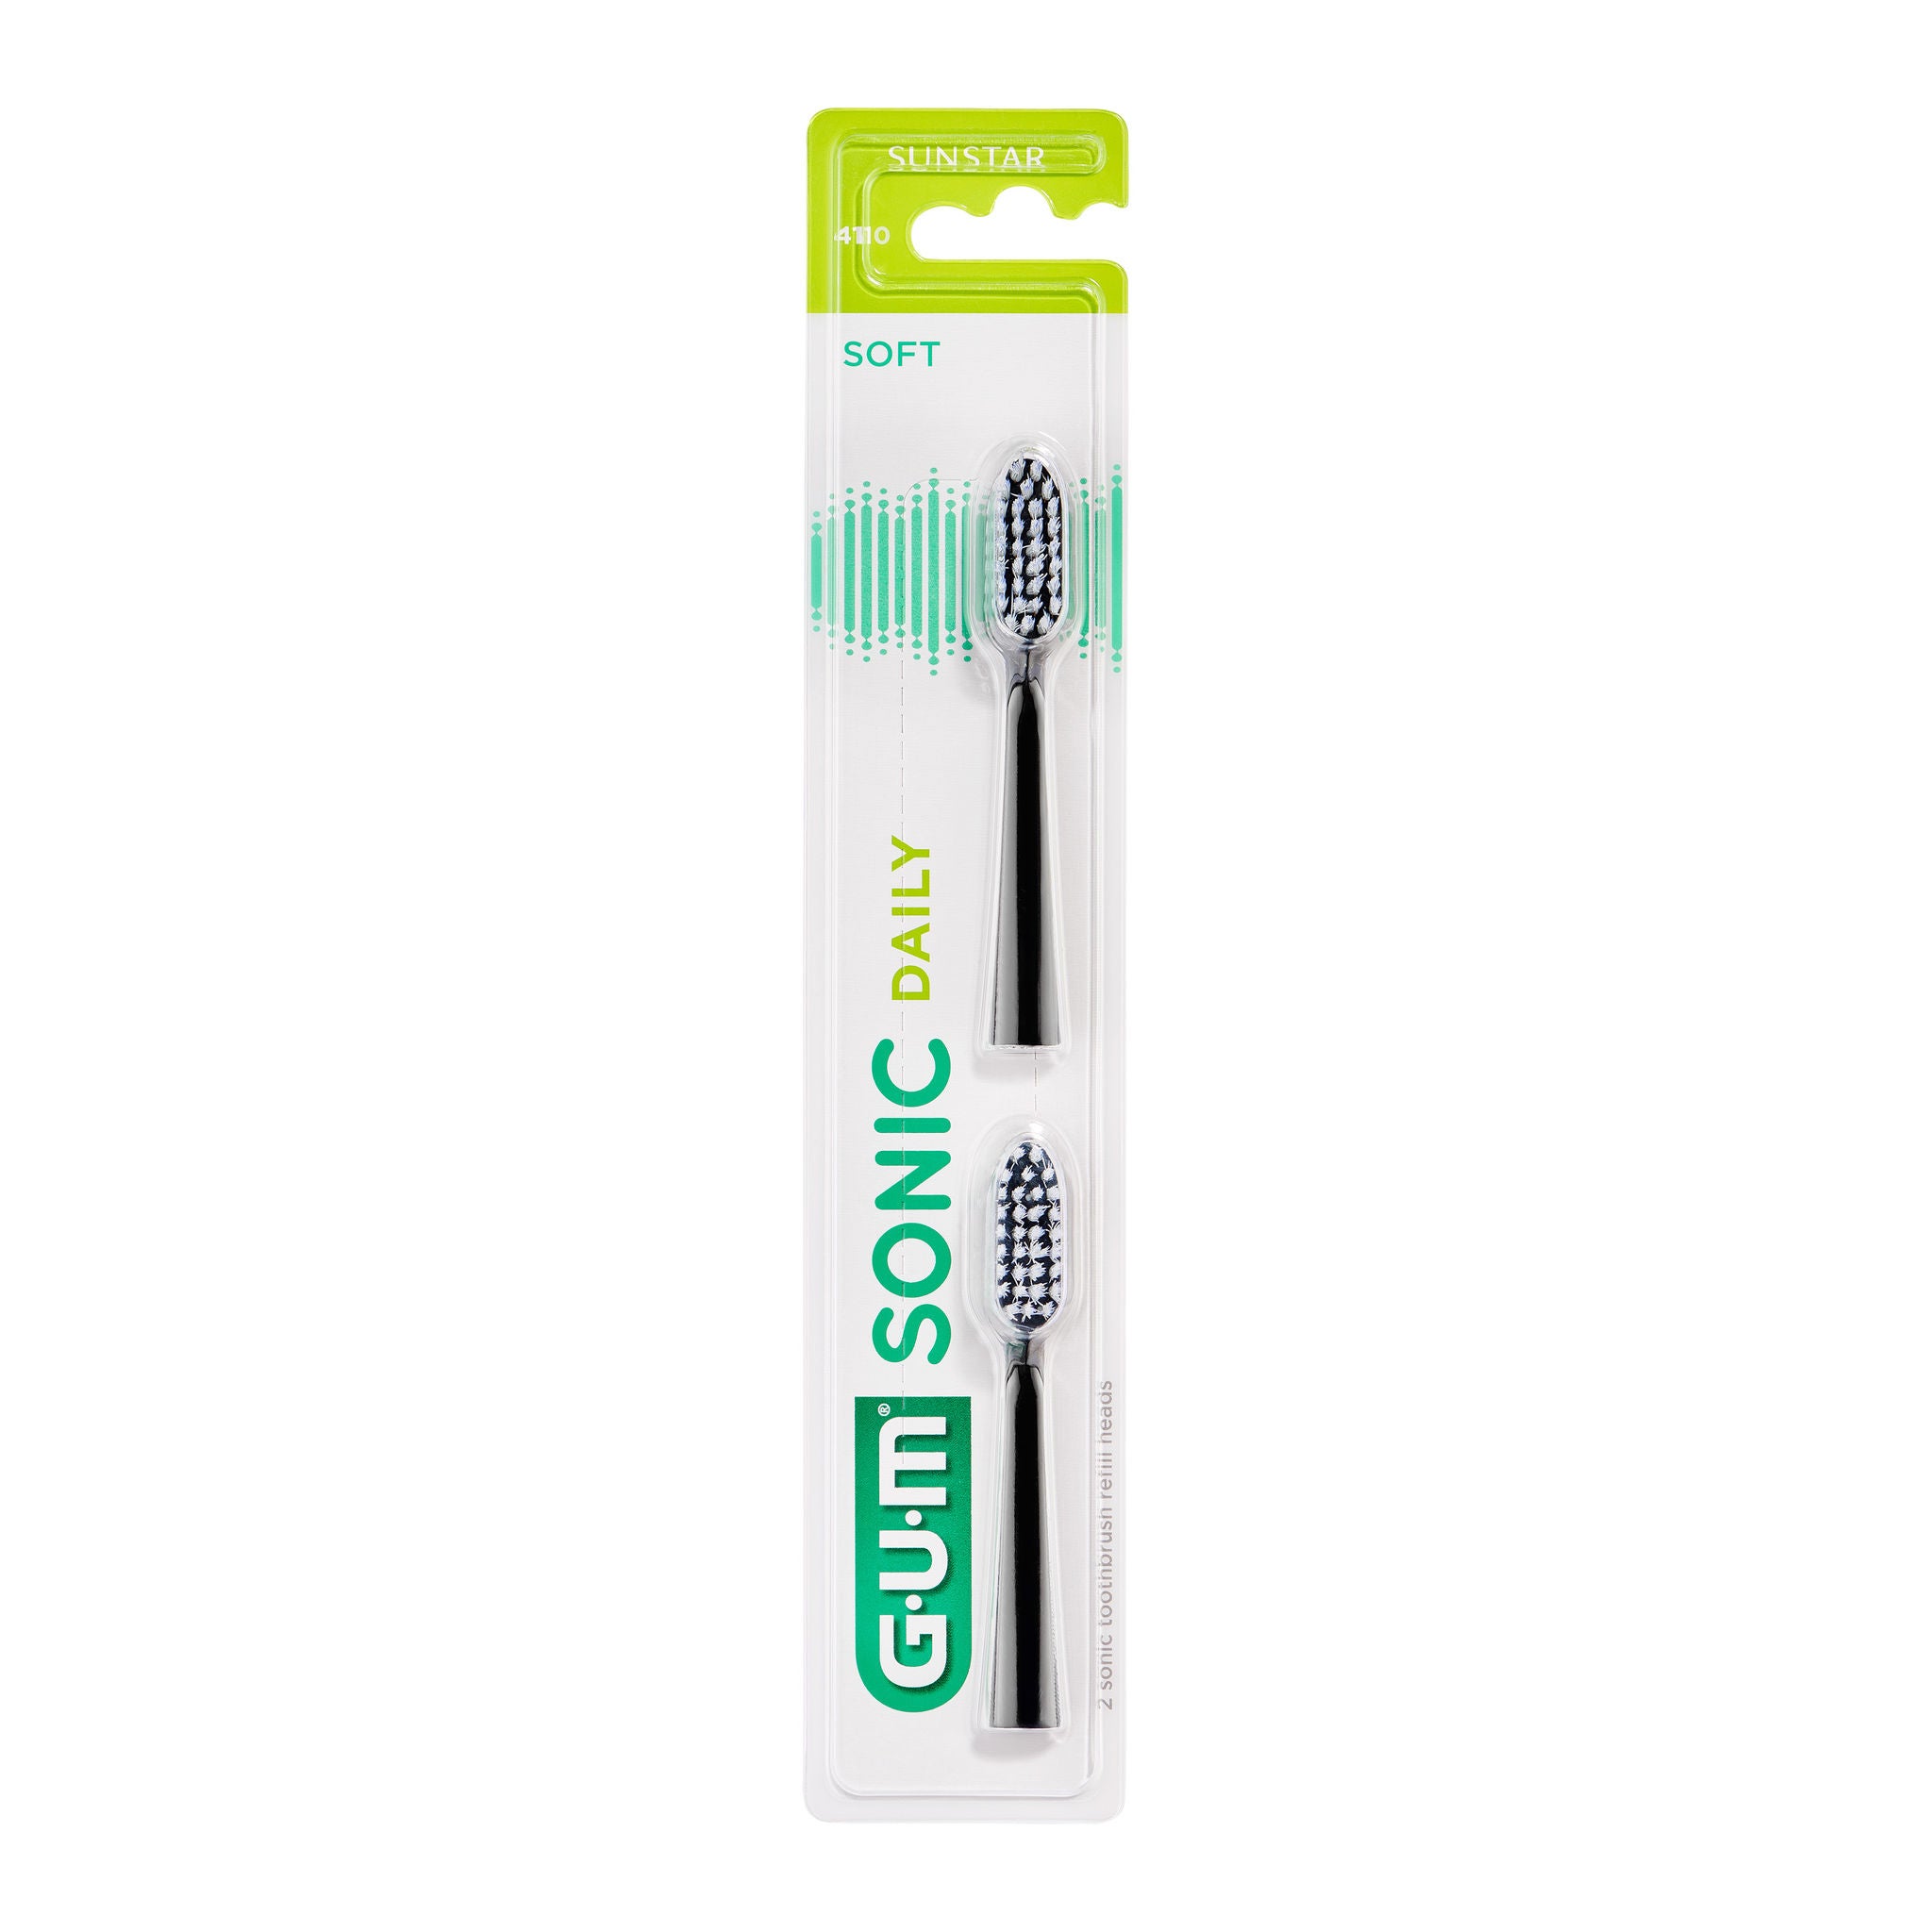 4110MBK2-GUM-SONICDAILY-TOOTHBRUSHES-BLACK-COMPACT-SOFT-2ct-BLISTER-P1.jpg